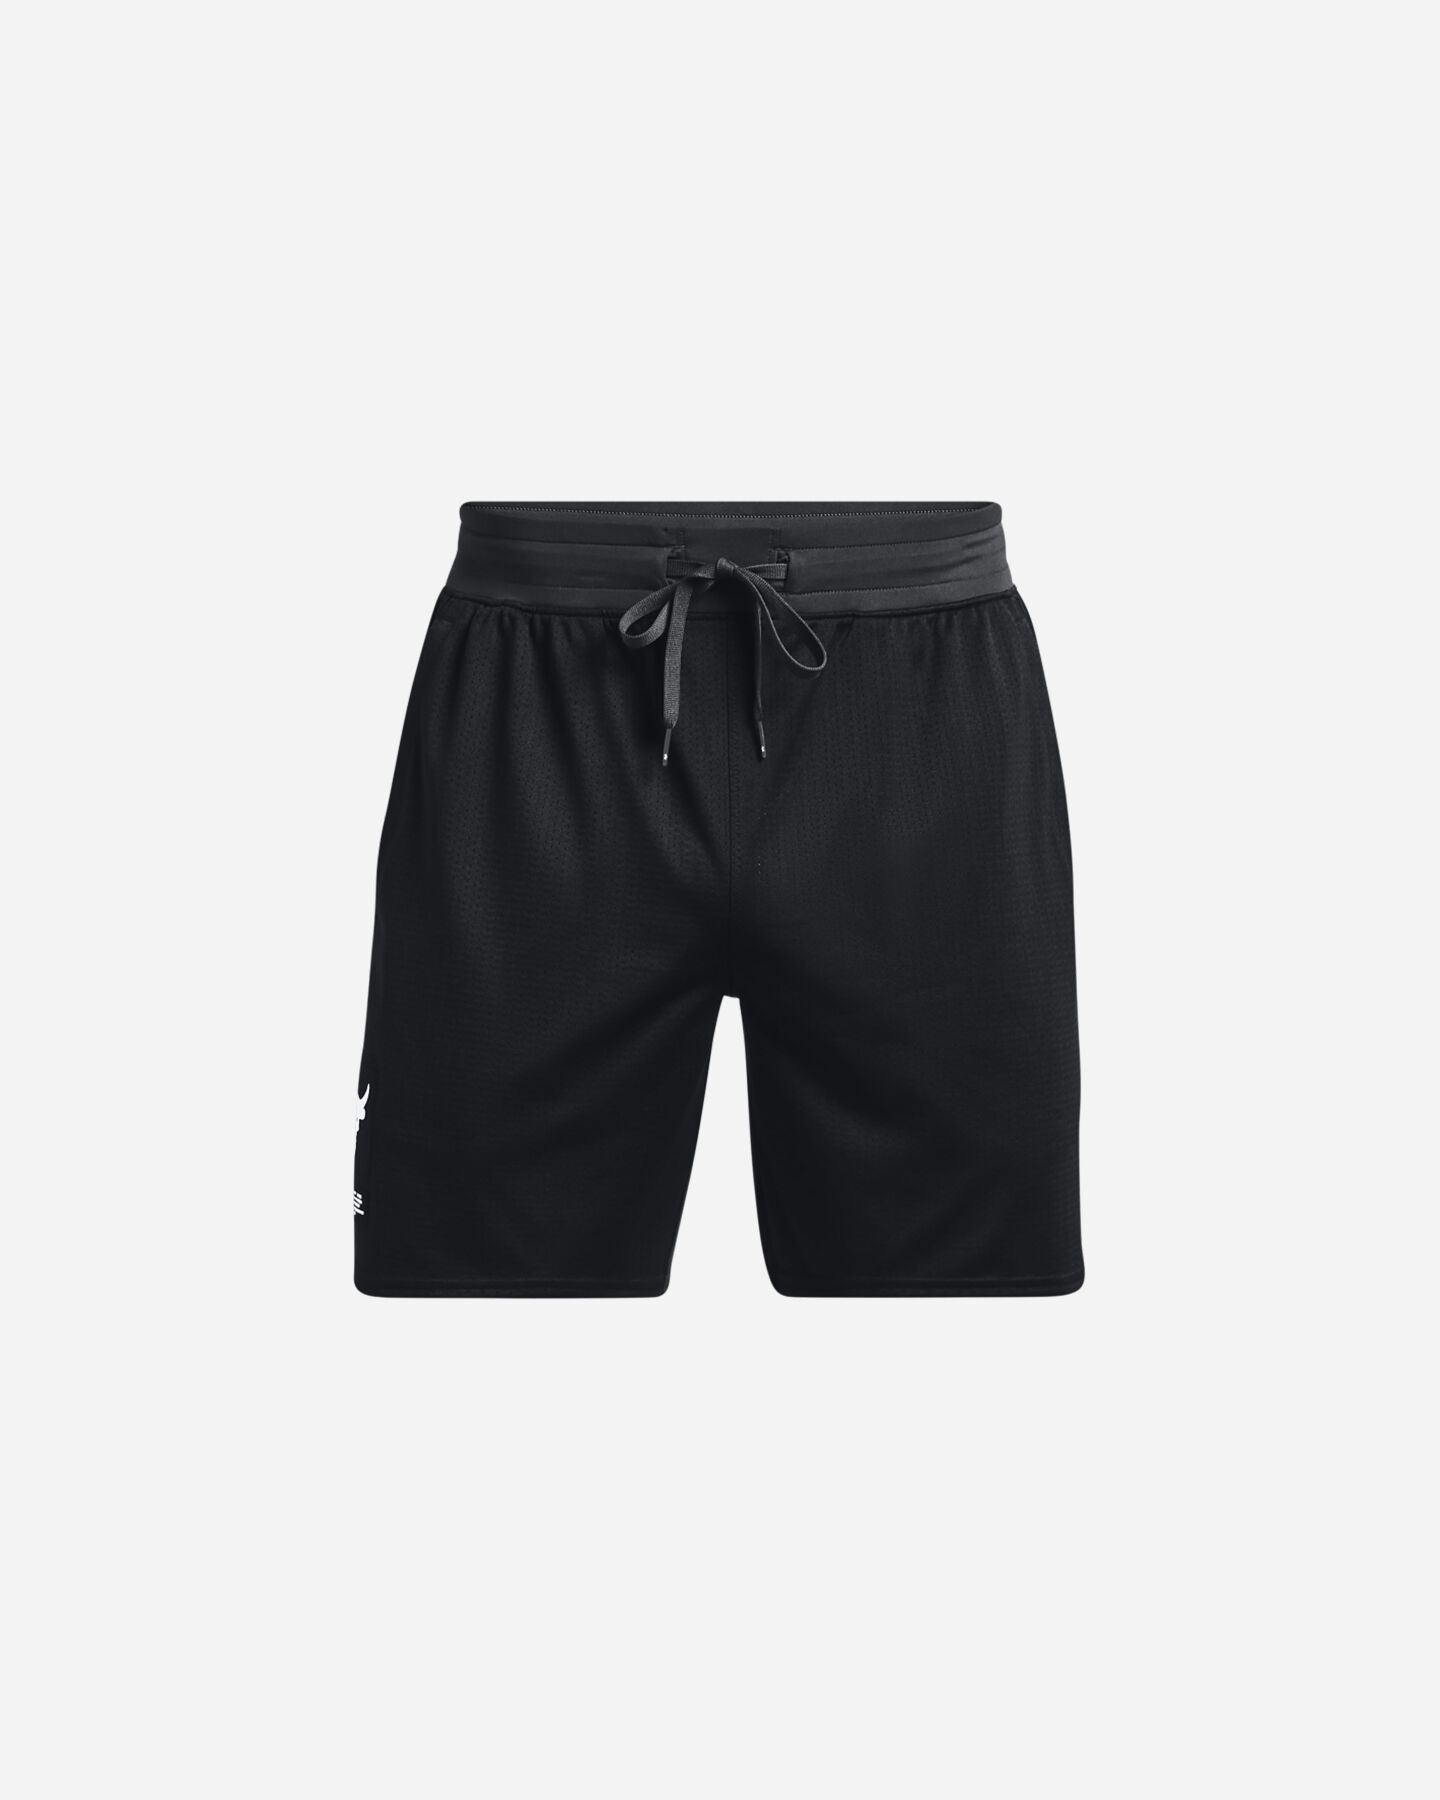  Pantaloncini UNDER ARMOUR THE ROCK MESH BOXING M S5390629|0001|XS scatto 0